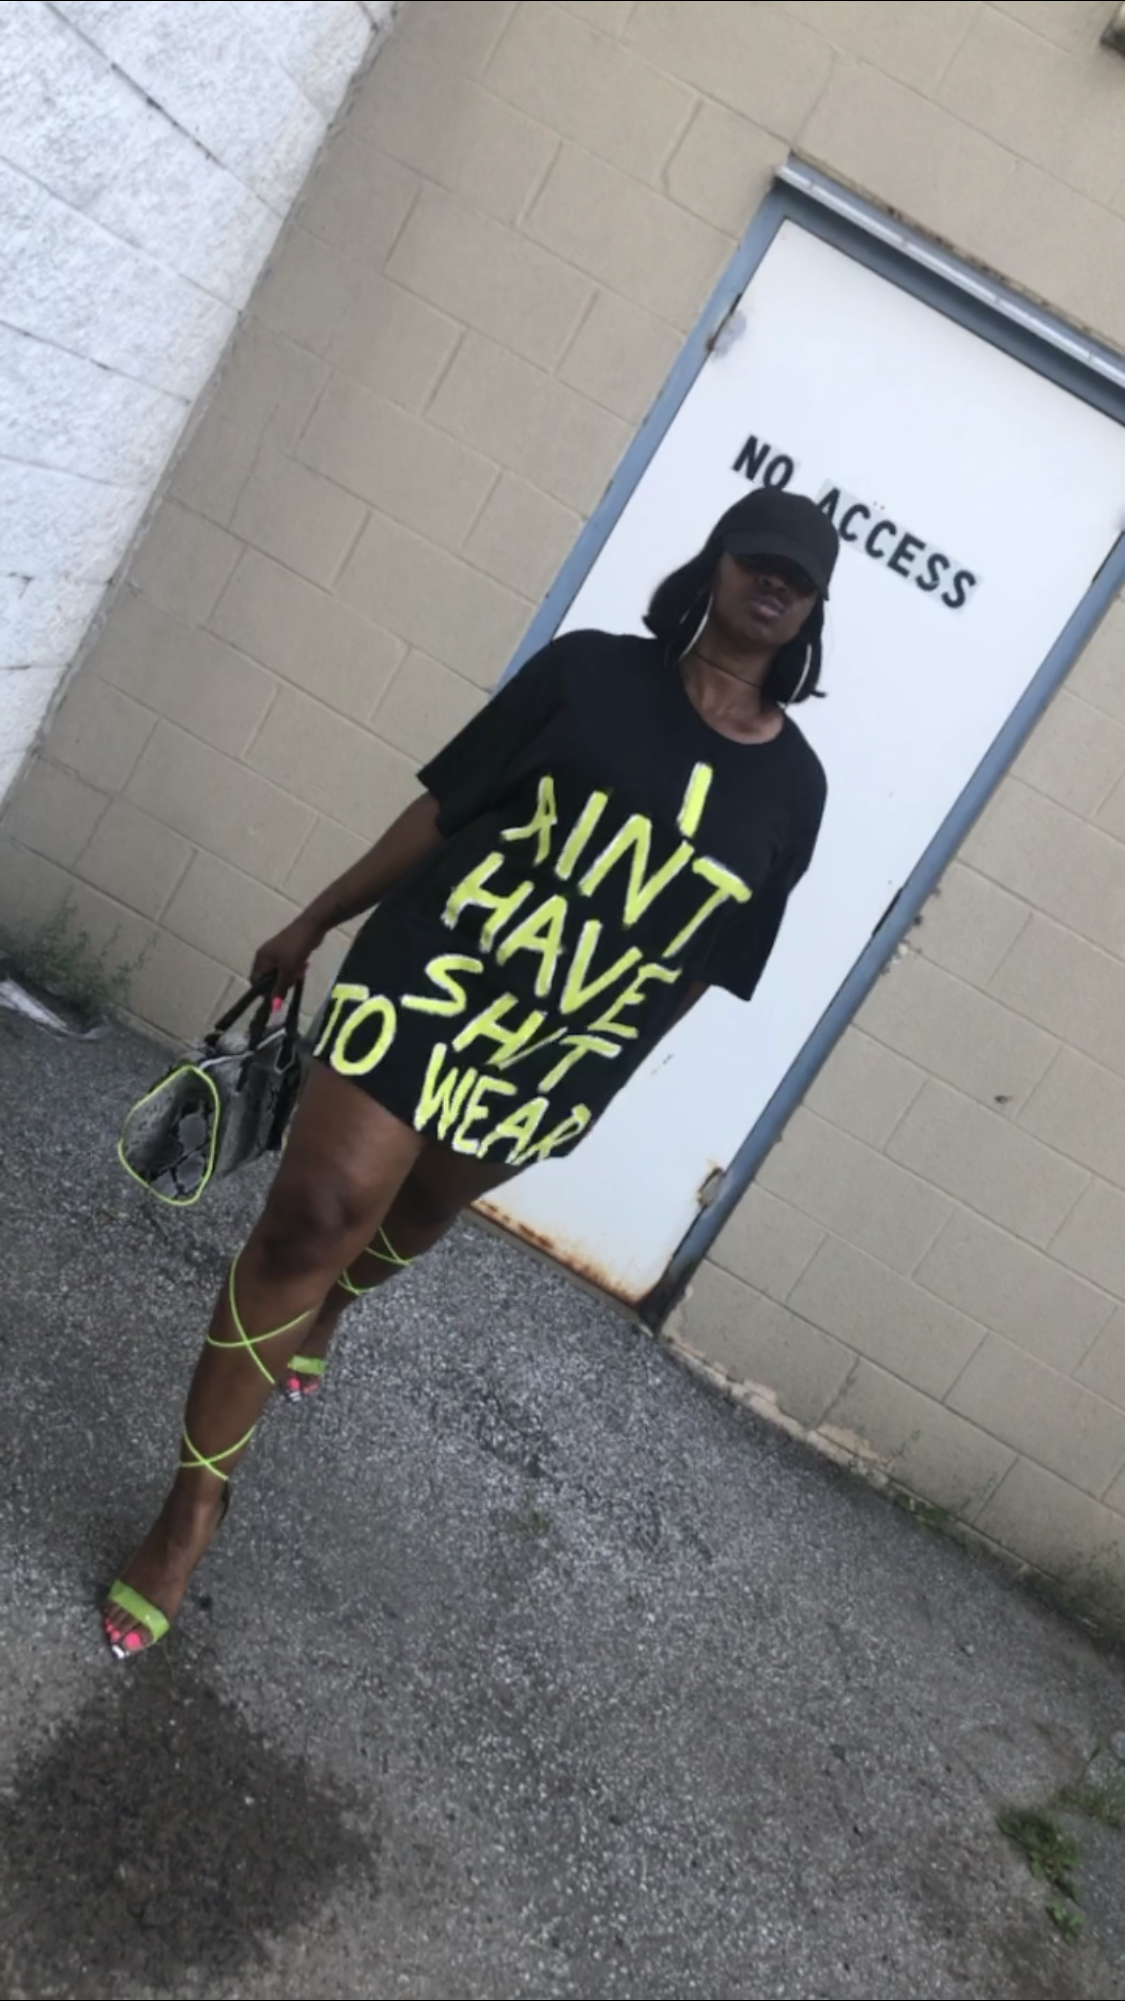 "I Ain't Have $hit To Wear" Tee (Censored Version Available Also!)